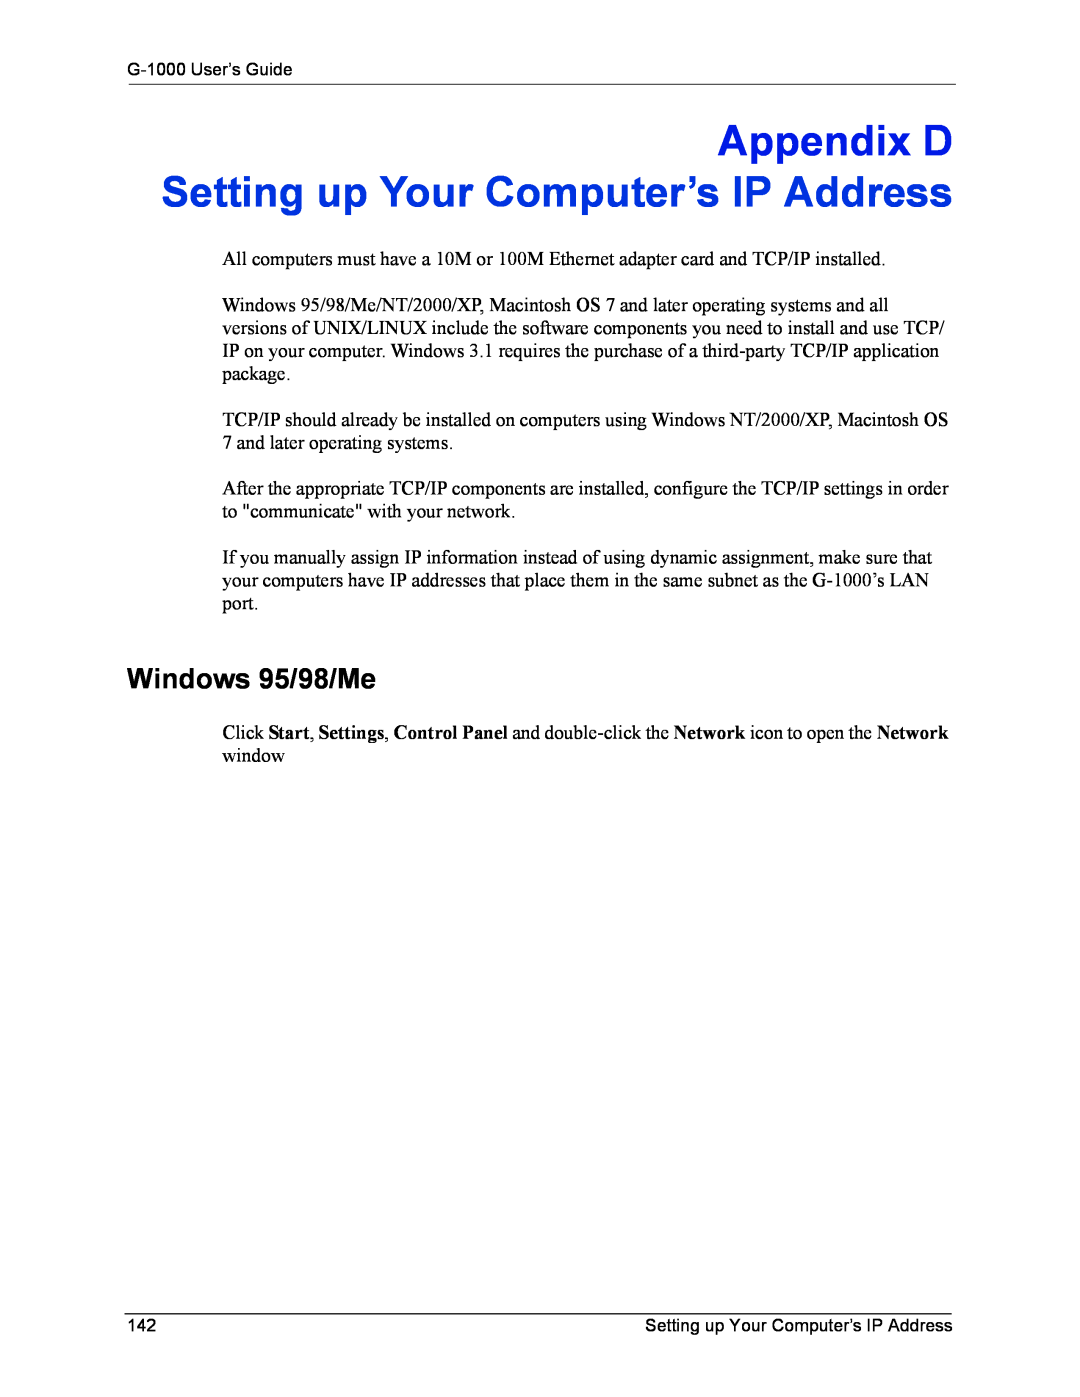 ZyXEL Communications G-1000 manual Appendix D Setting up Your Computer’s IP Address, Windows 95/98/Me 